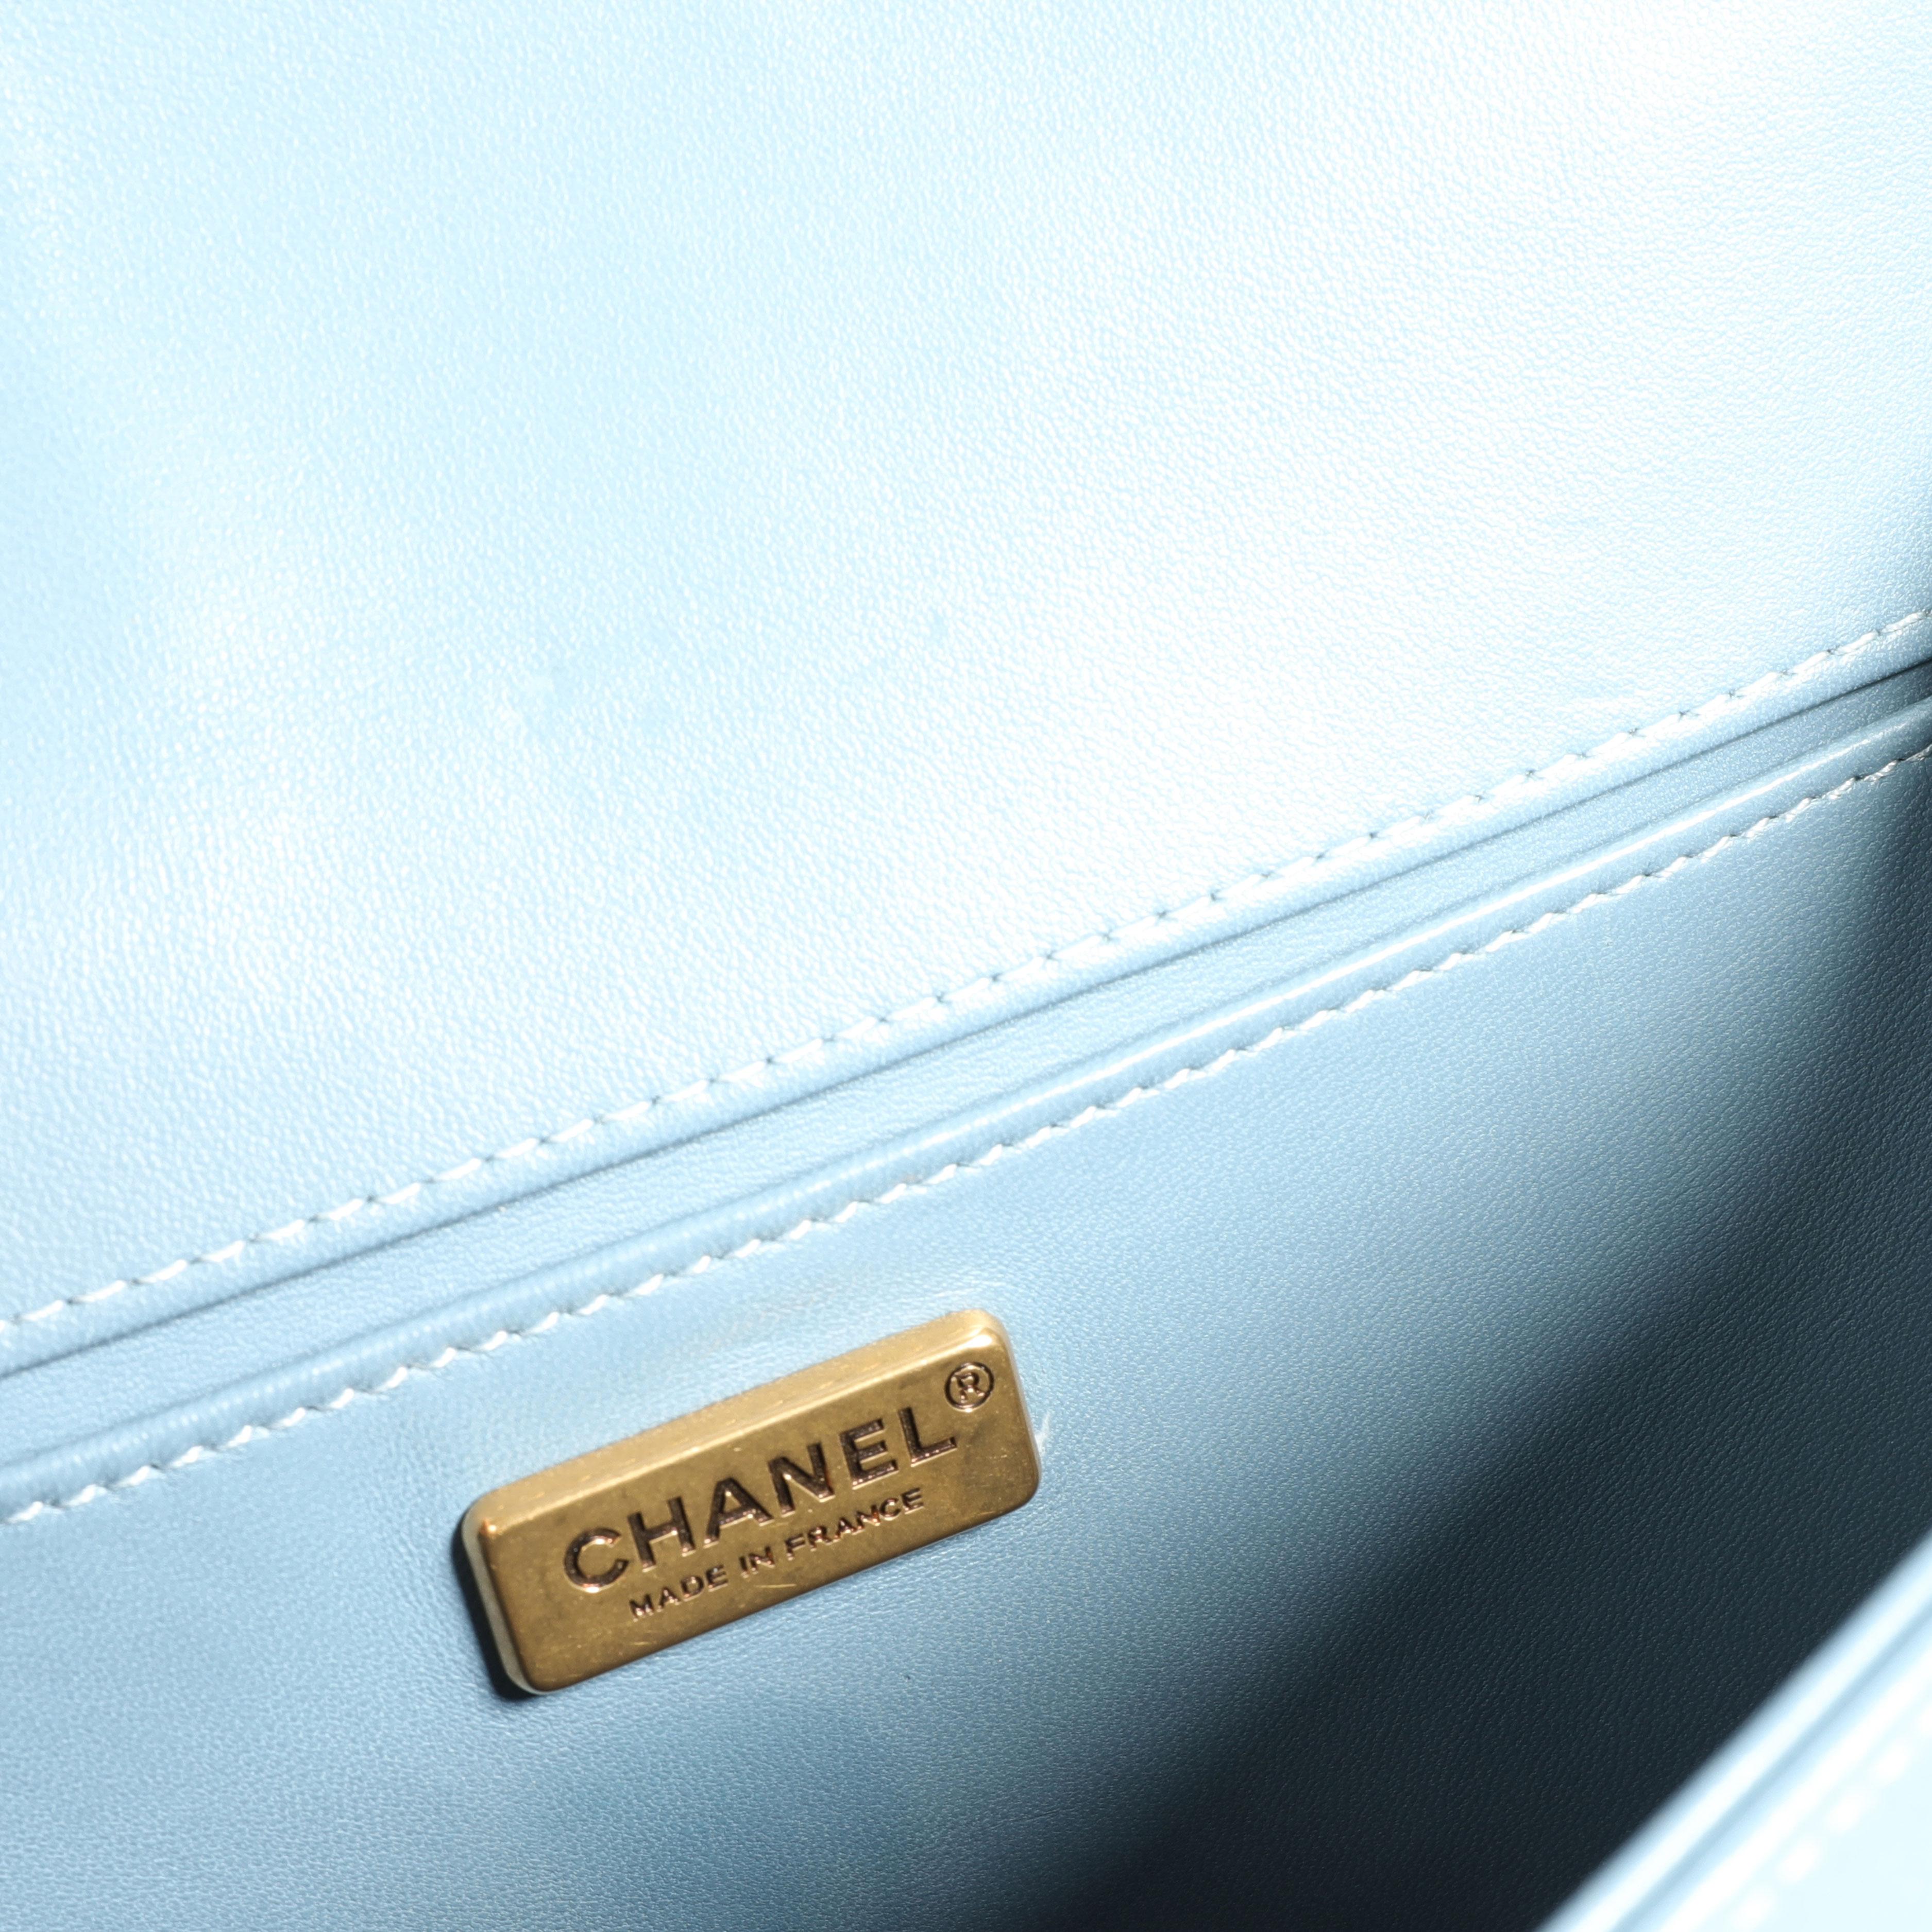 Chanel Limited Edition Light Blue Leather & Mosaic Medium Boy Bag
SKU: 111045

MSRP: USD 7,500.00
Handbag Condition: Very Good
Condition Comments: Very Good Condition. Light scuffing to exterior edges and corners. Scratching to hardware. Light